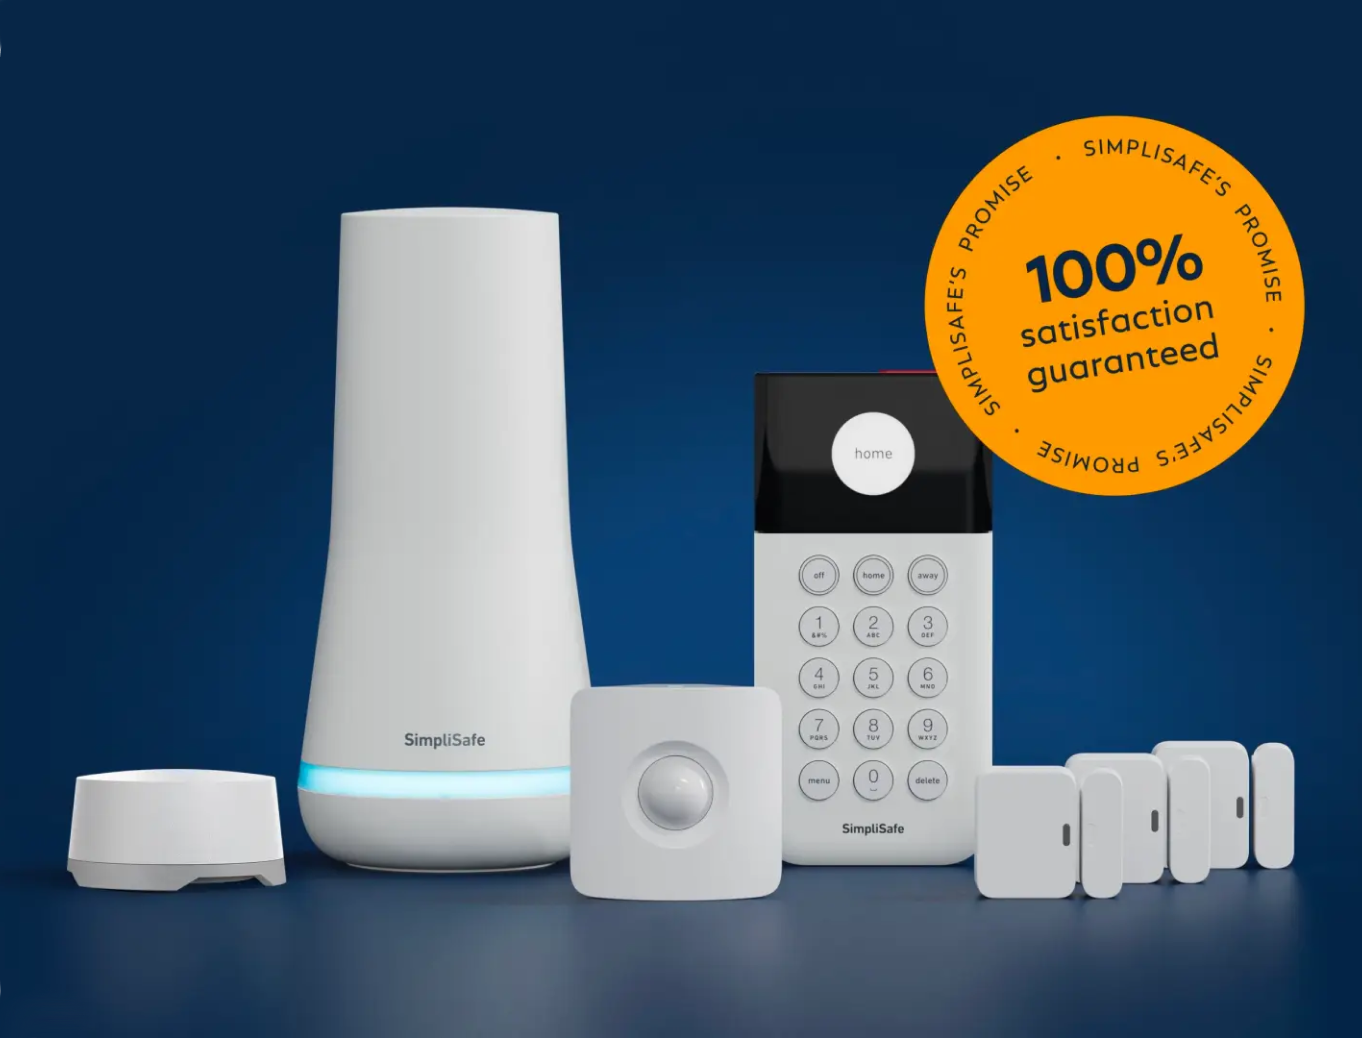 Whole home security at an unbeatable price